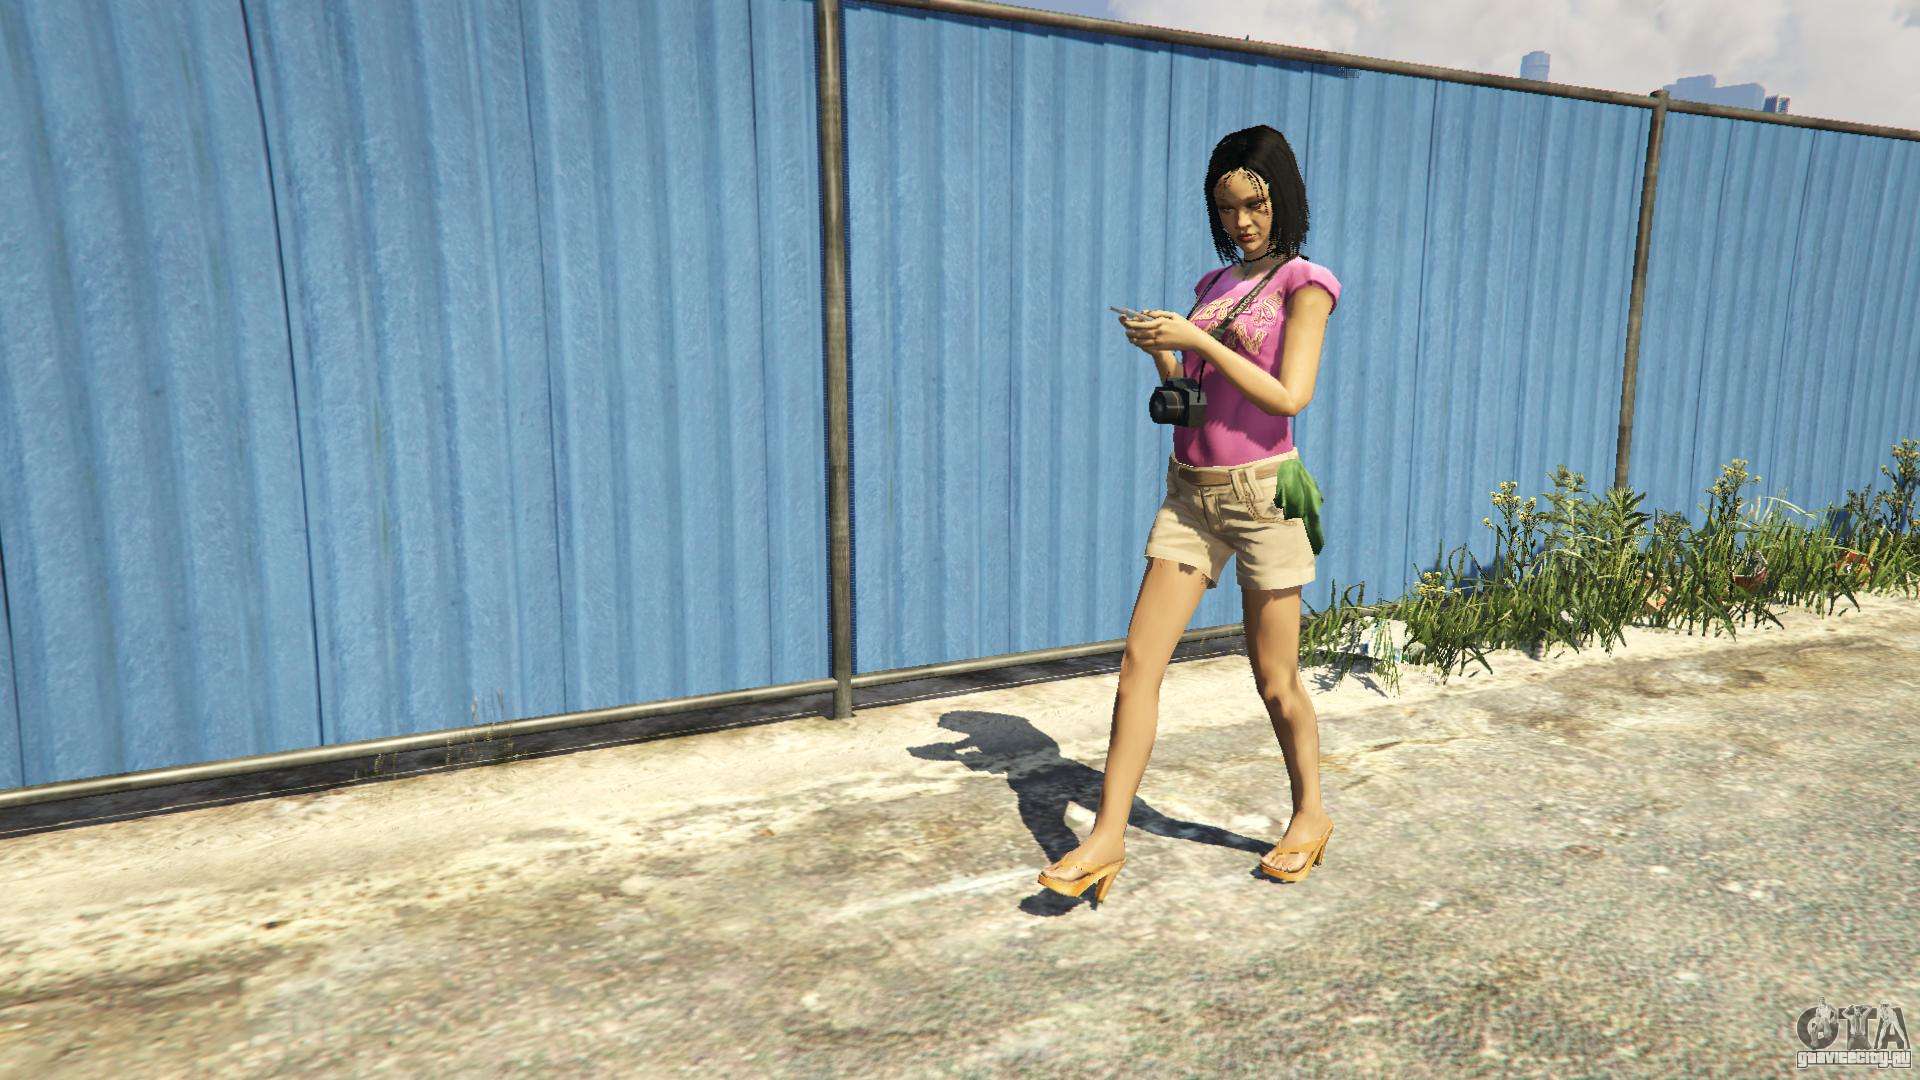 Gta 5 How To Get A Girlfriend